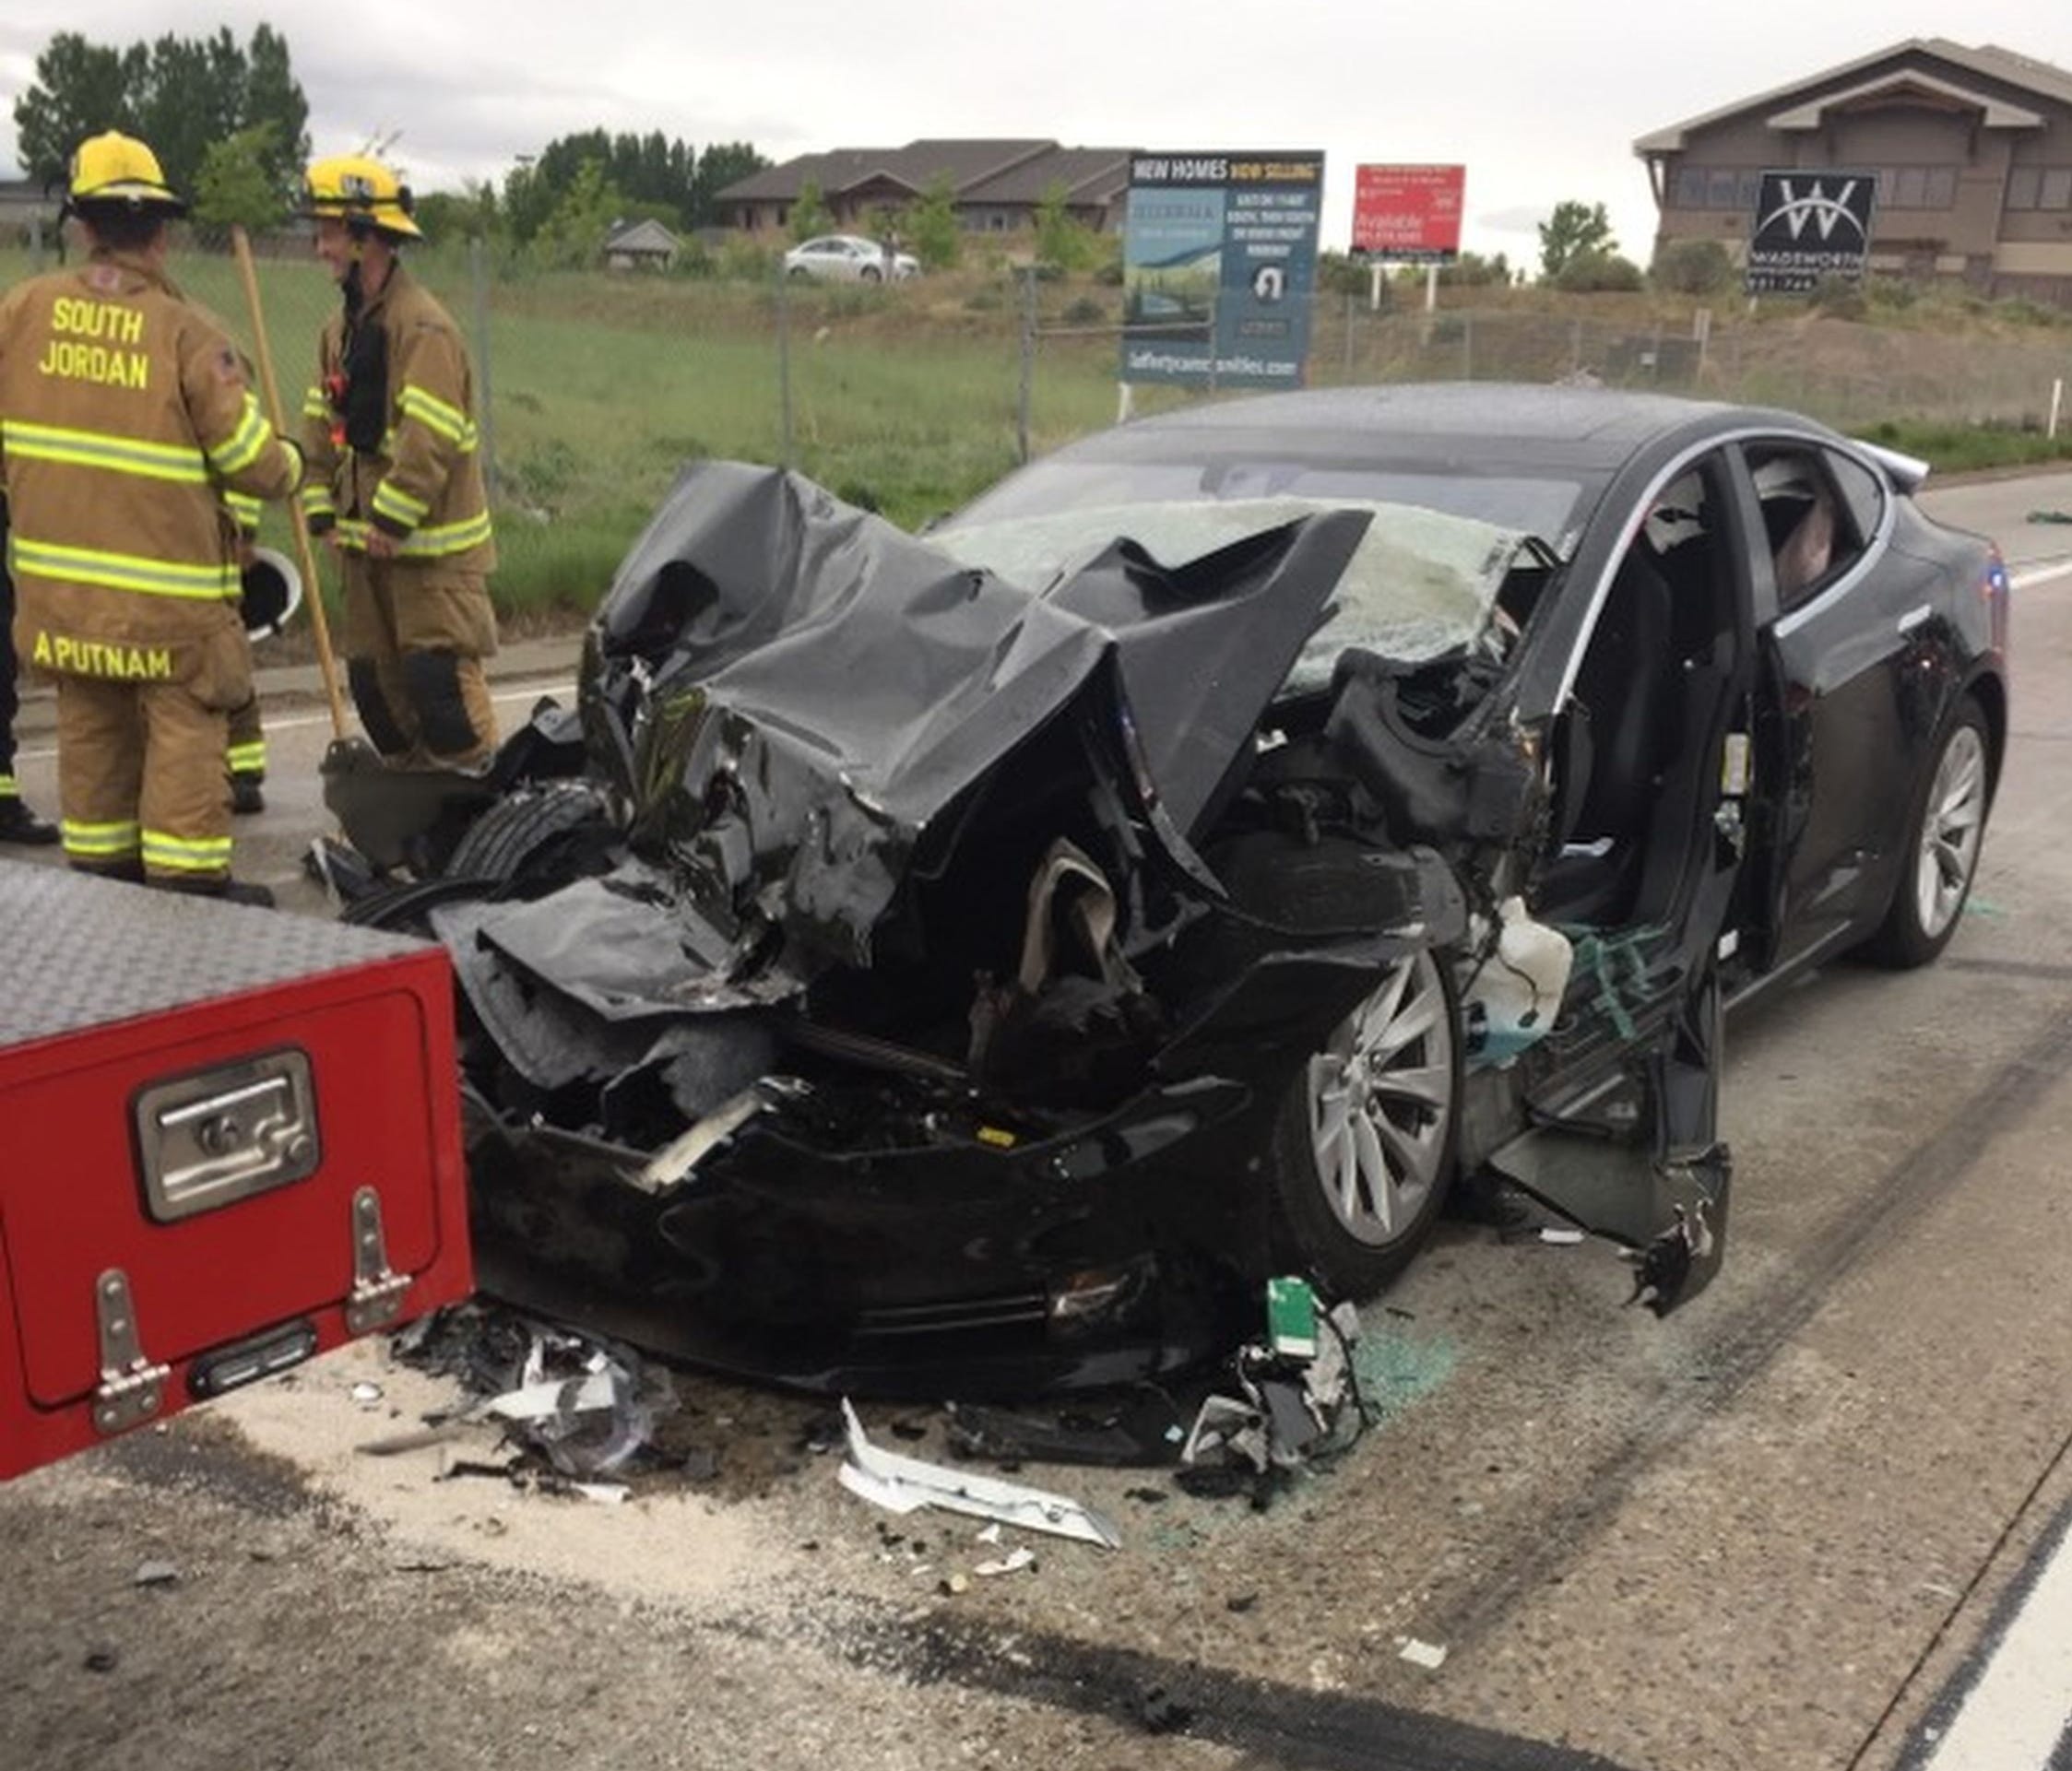 A Tesla sedan with a semi-autonomous Autopilot feature rear-ended a fire department truck at 60 mph (97 kph) apparently without braking before impact on May 11, 2018, but police say it's unknown if the Autopilot feature was engaged.